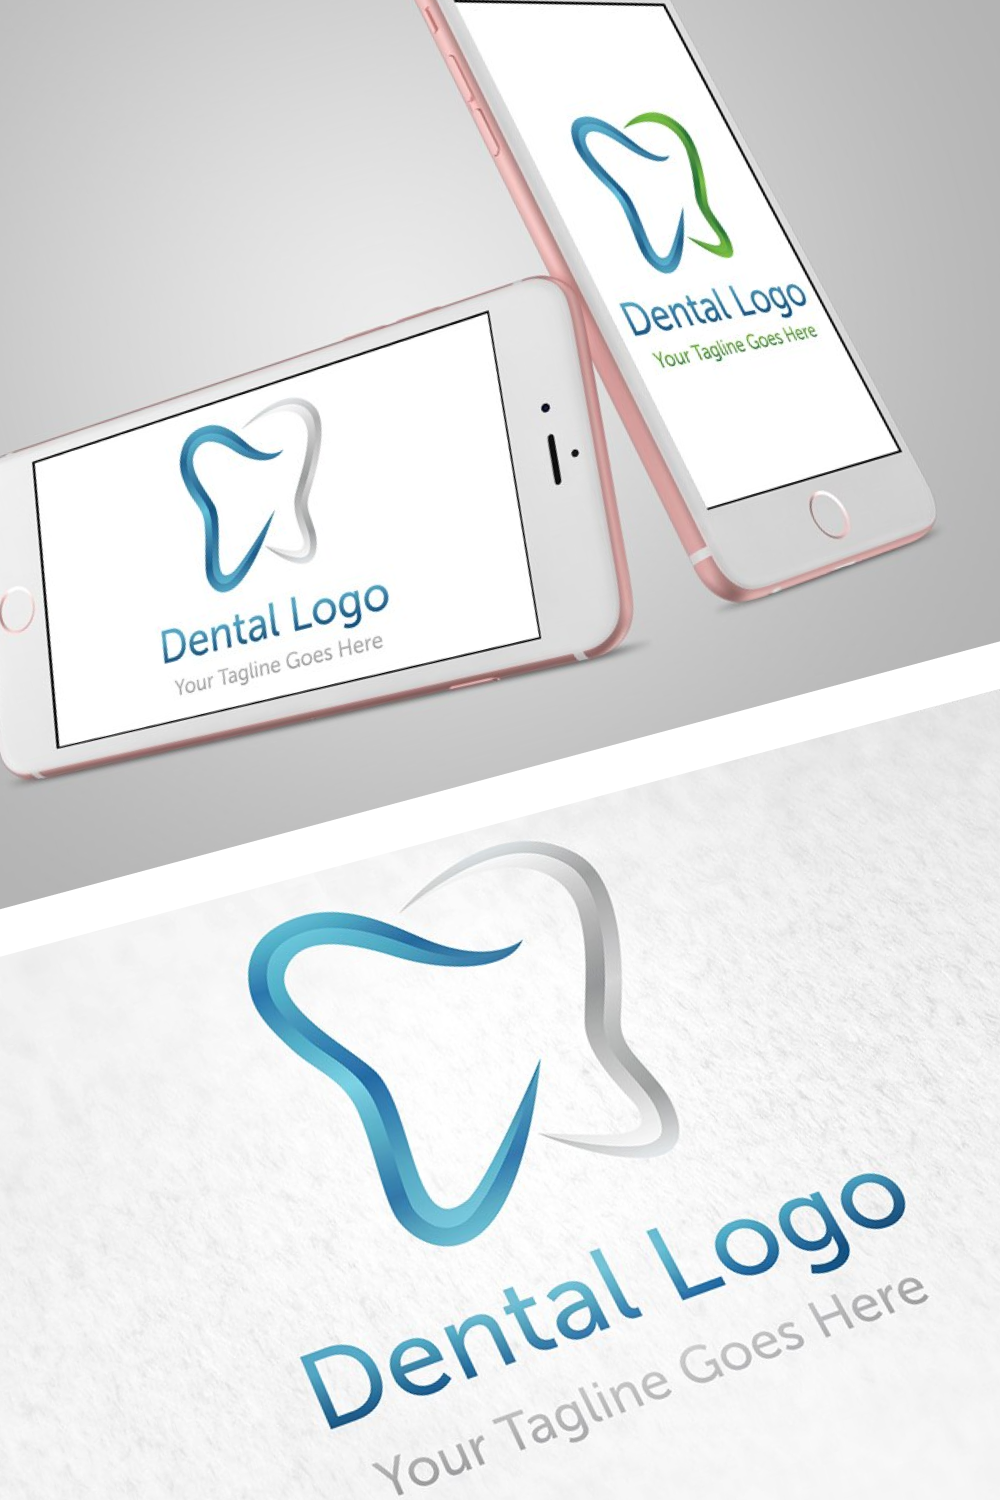 Logos for all types.